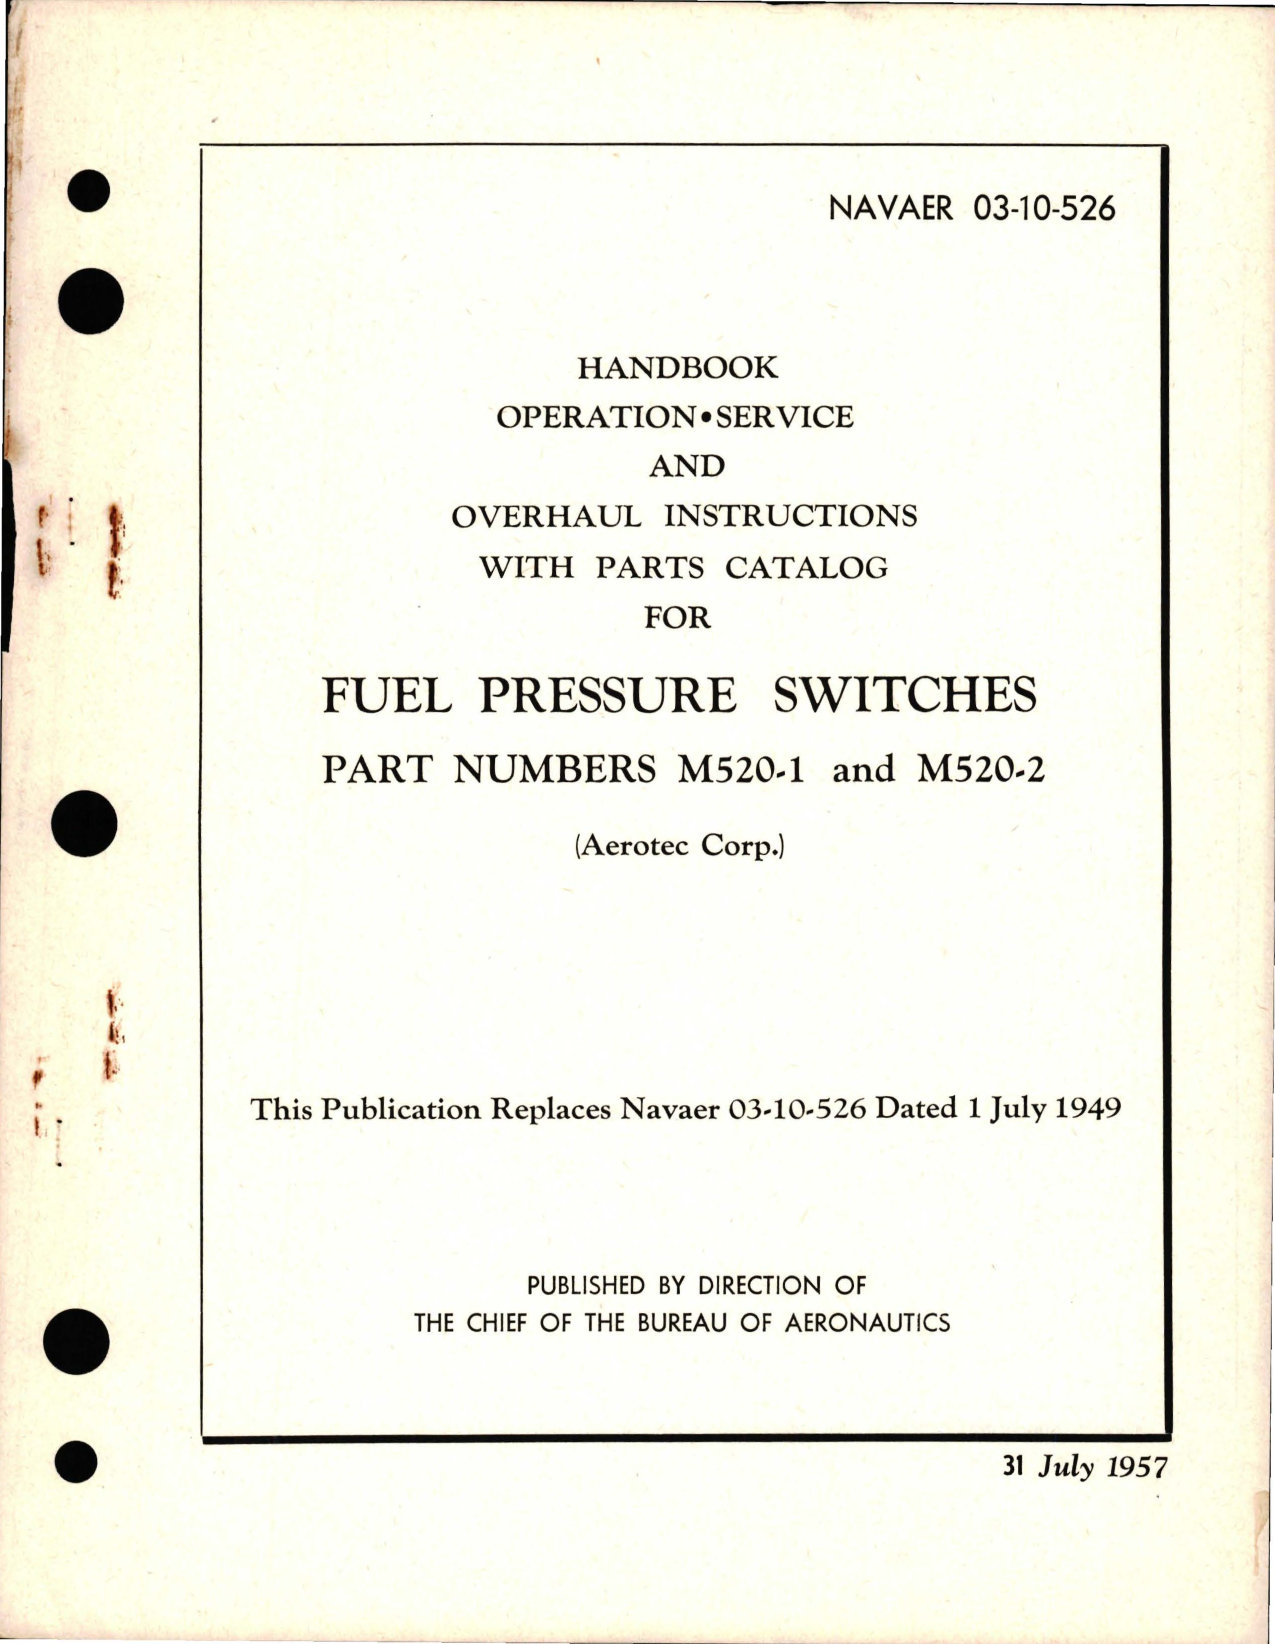 Sample page 1 from AirCorps Library document: Operation, Service, and Overhaul Instructions with Parts Catalog for Fuel Pressure Switches - Parts M520-1 and M520-2